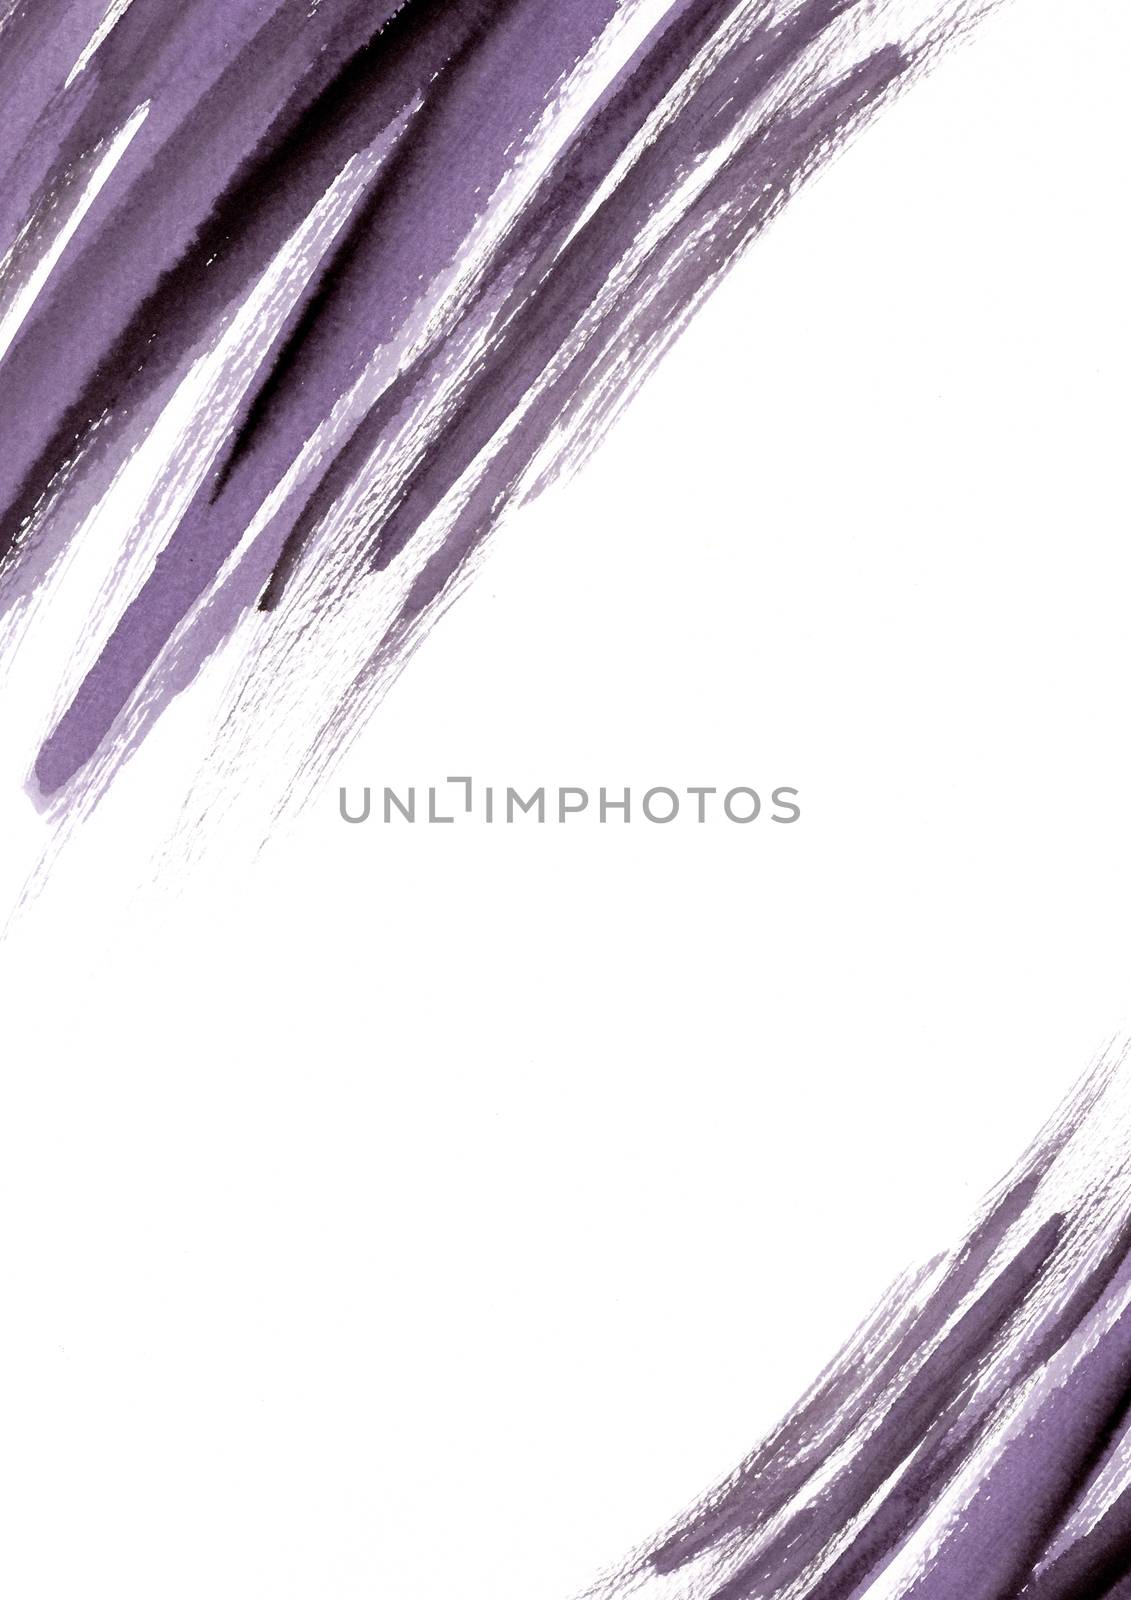 Purple and black abstract hand painted watercolor background. Grunge style paint brush. by Ungamrung